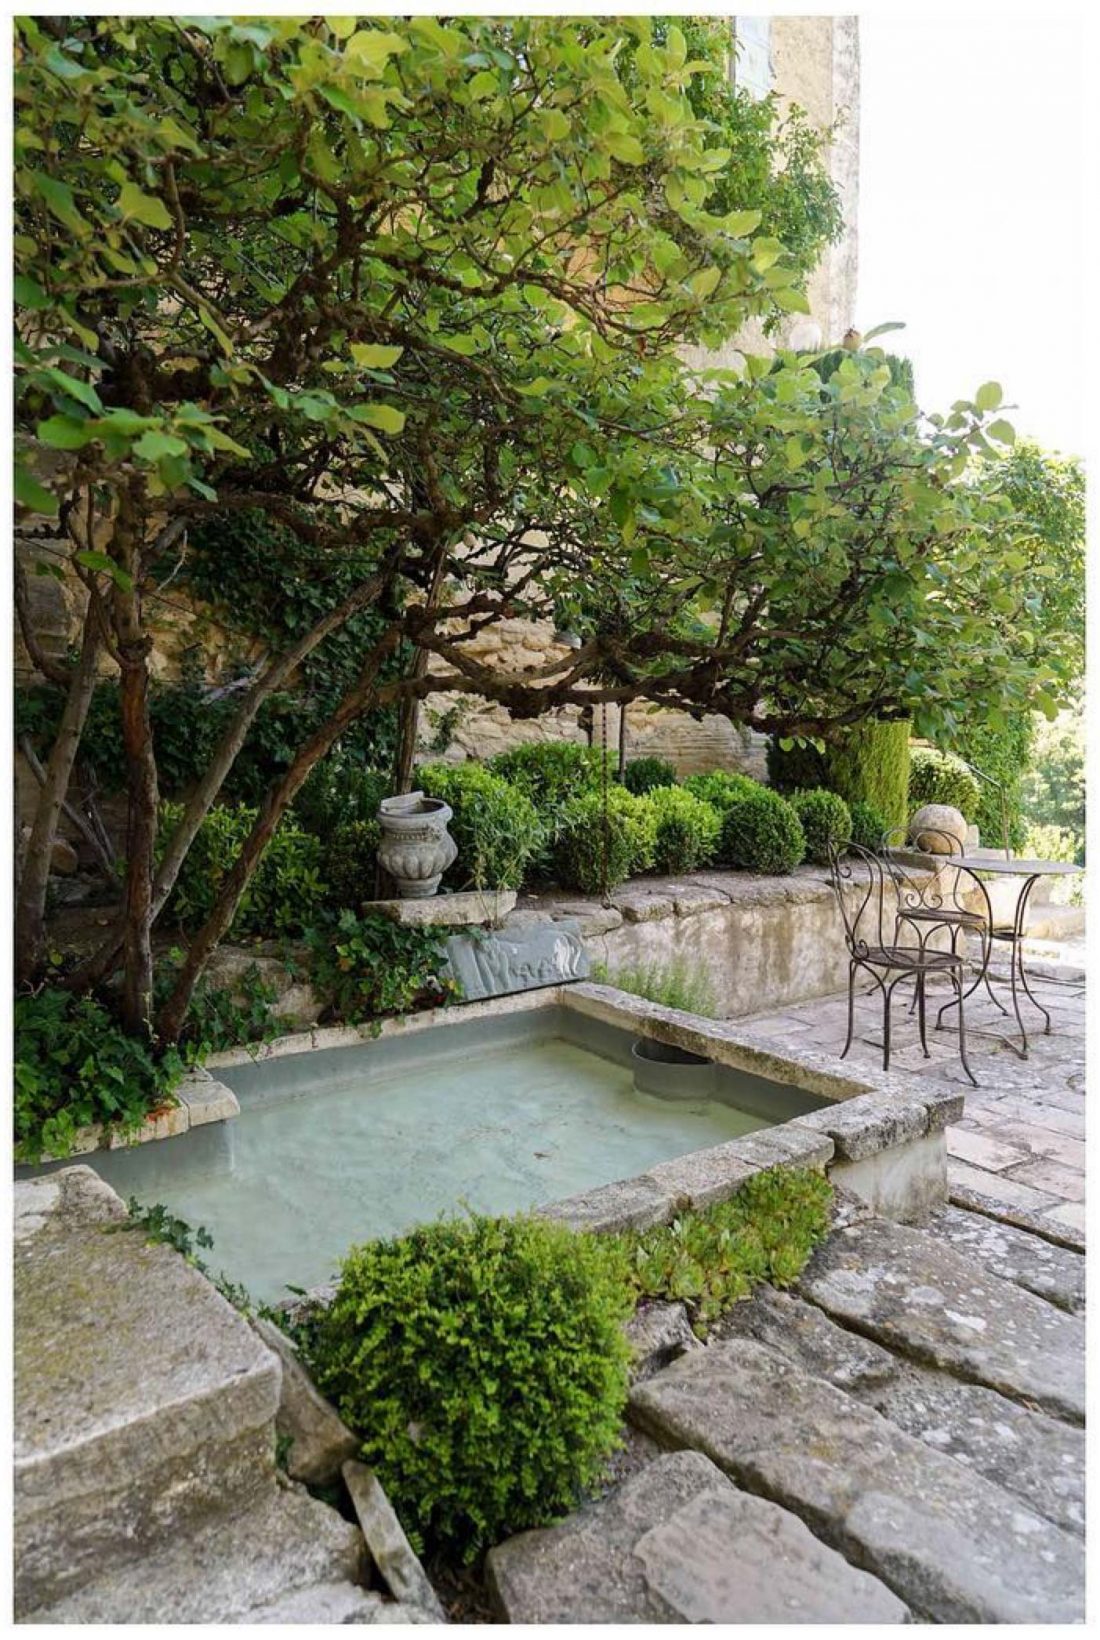 A simple dipping pool set within the limestone cliff at La Louve garden in Provence, France. image by @farlamandchandler